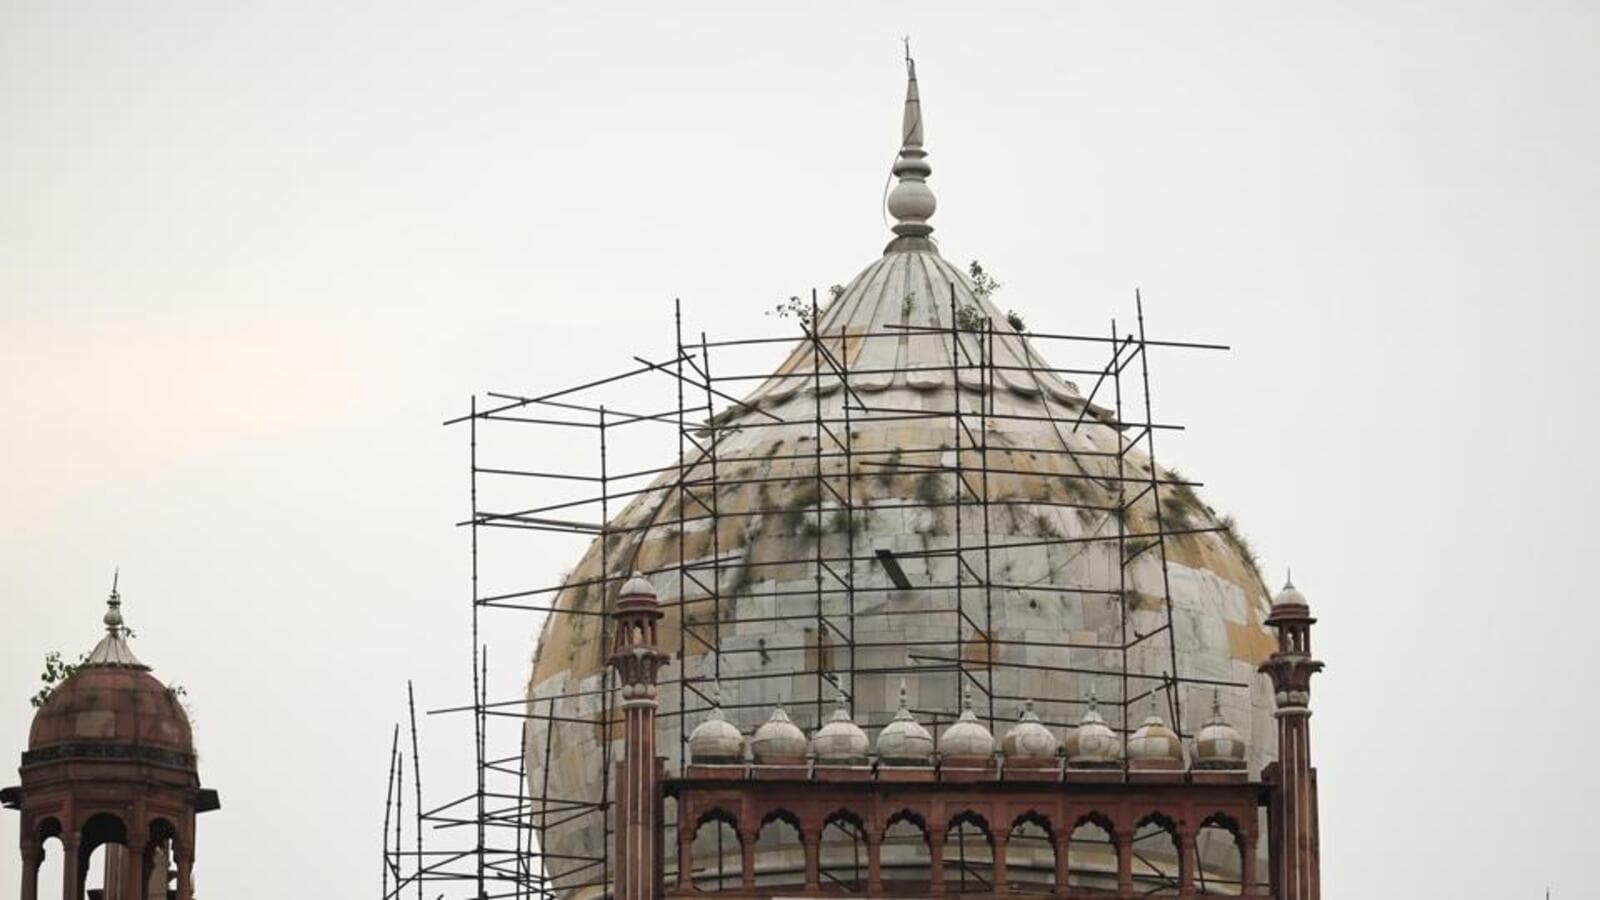 Asi To Restore Safdarjung Tomb Dome In Delhi By July-End | Latest News Delhi - Hindustan Times